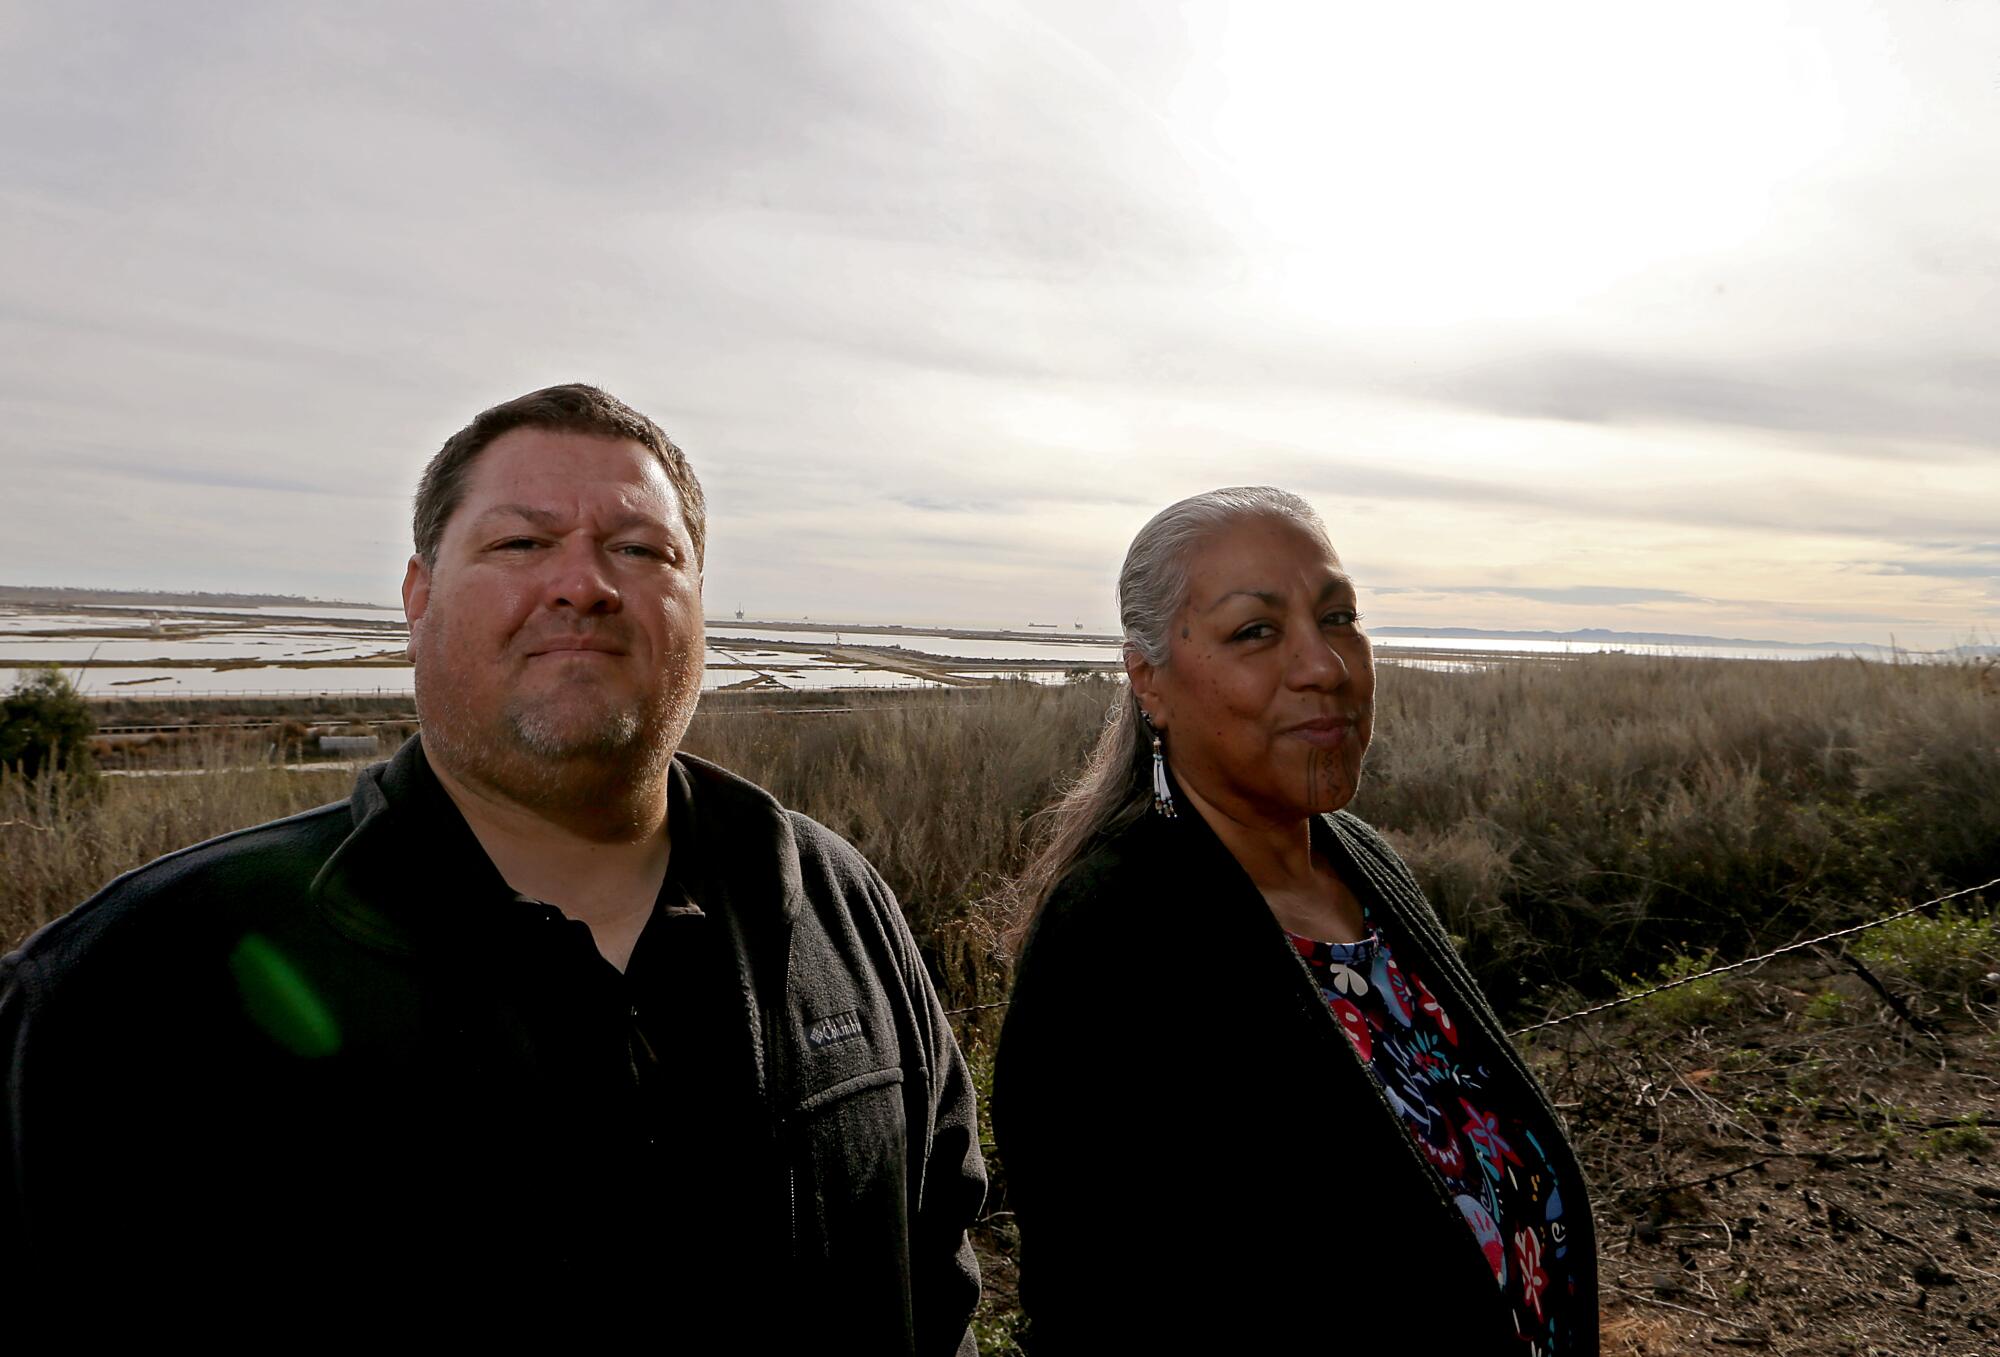 Dustin Murphey and Tina Calderon stand on coastal land that has been returned to Indigenous tribes.